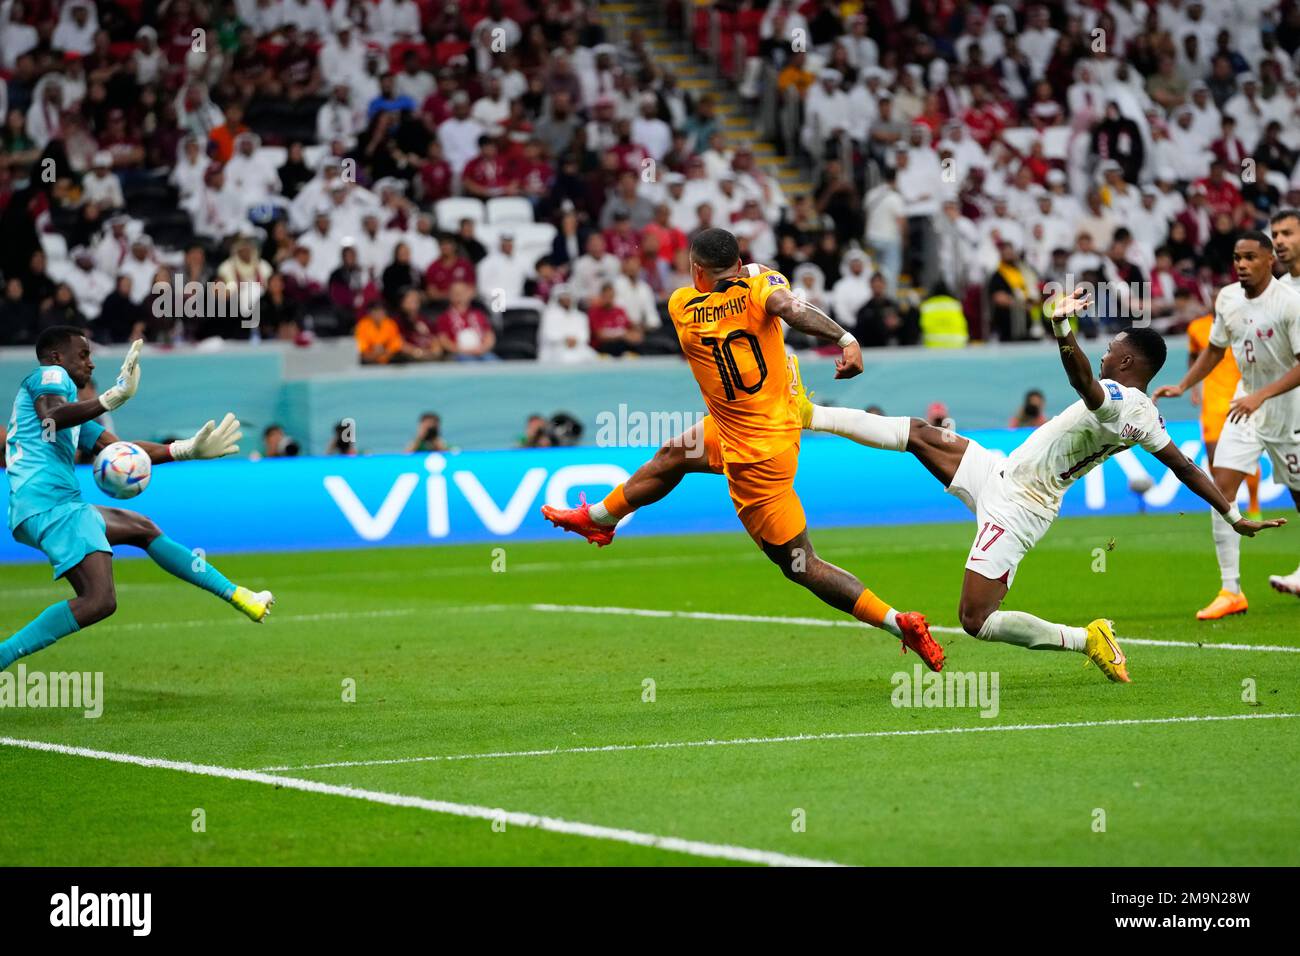 Qatar's goalkeeper Meshaal Barsham blocks a shot from Memphis Depay of the  Netherlands during a World Cup group A soccer match at the Al Bayt Stadium  in Al Khor, Qatar, Tuesday, Nov.